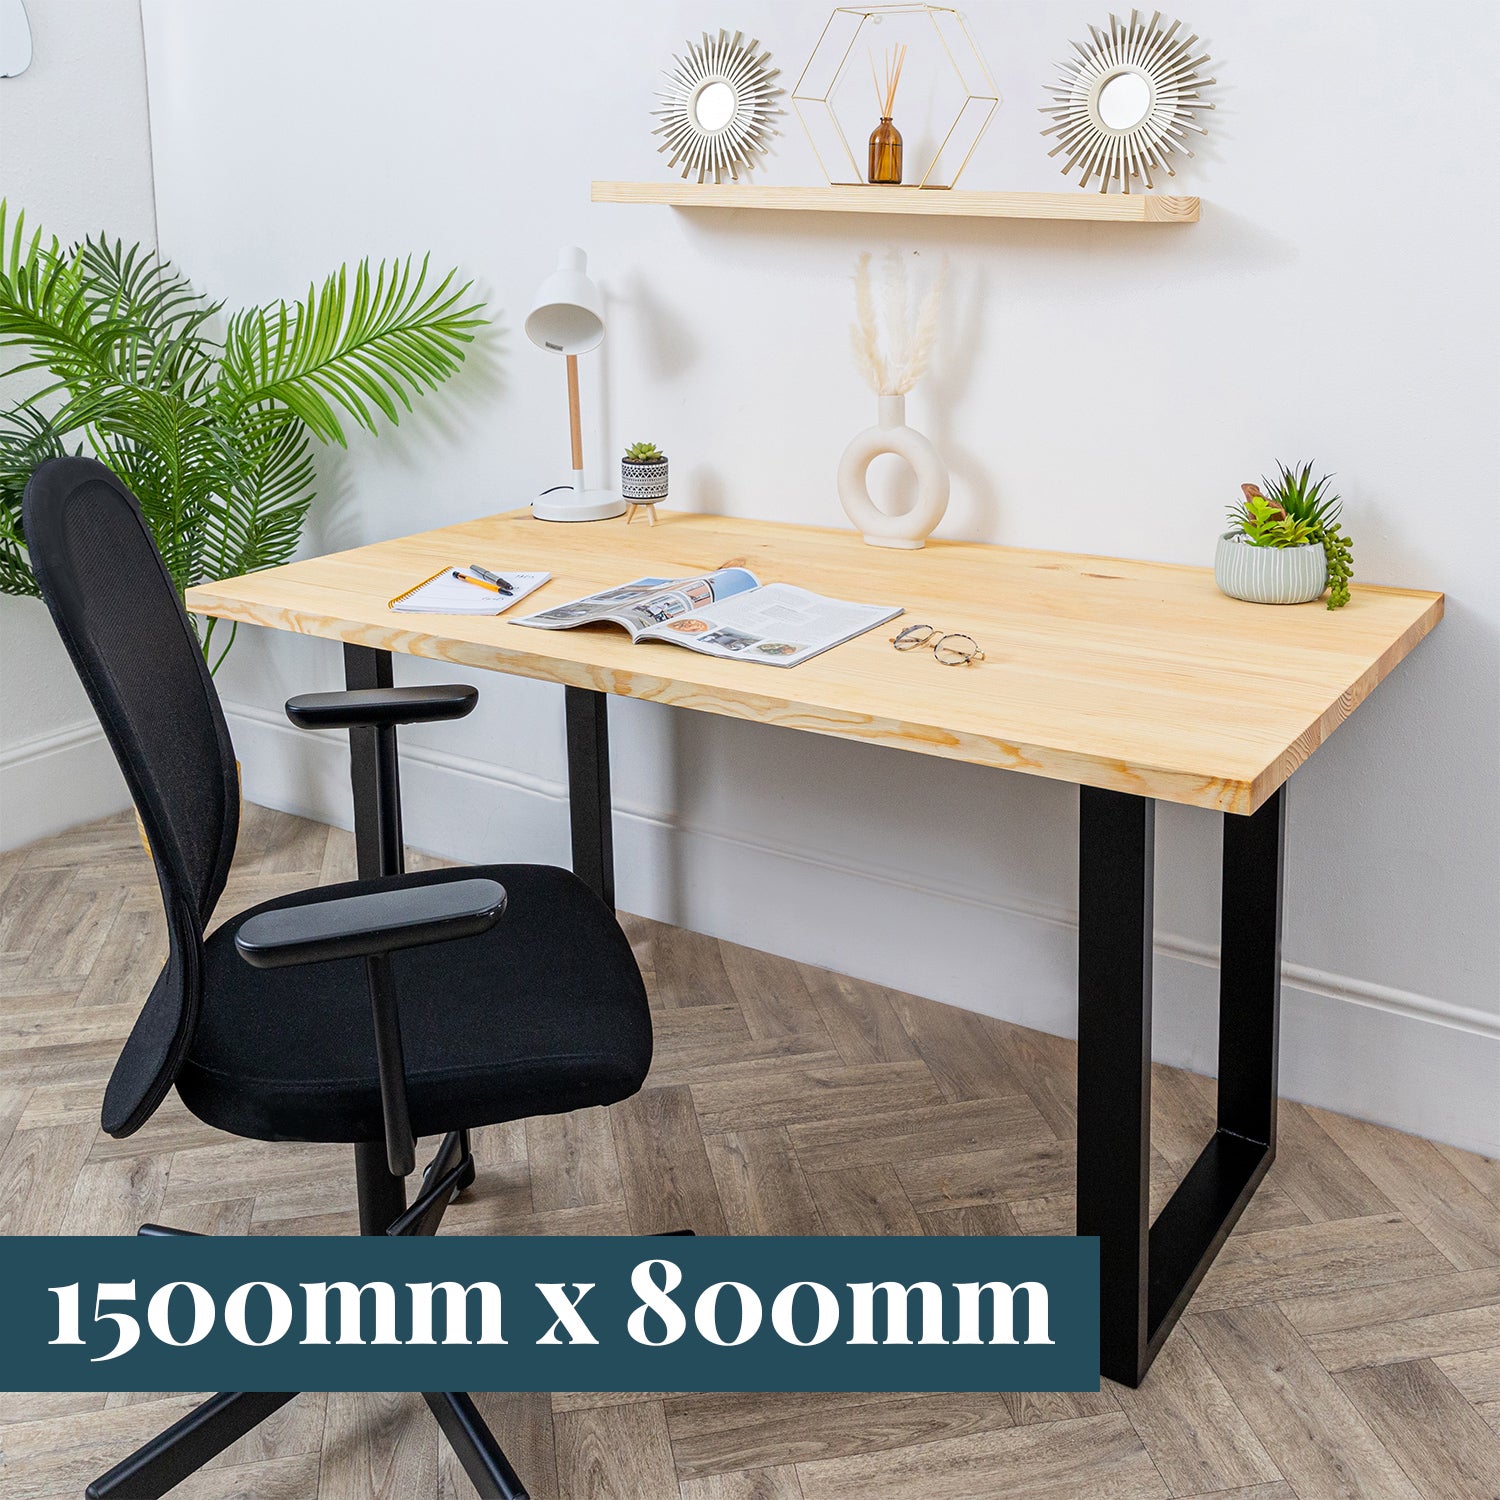 Pine Solid Wood Desk with Square Metal Legs #length_1500mm depth_800mm